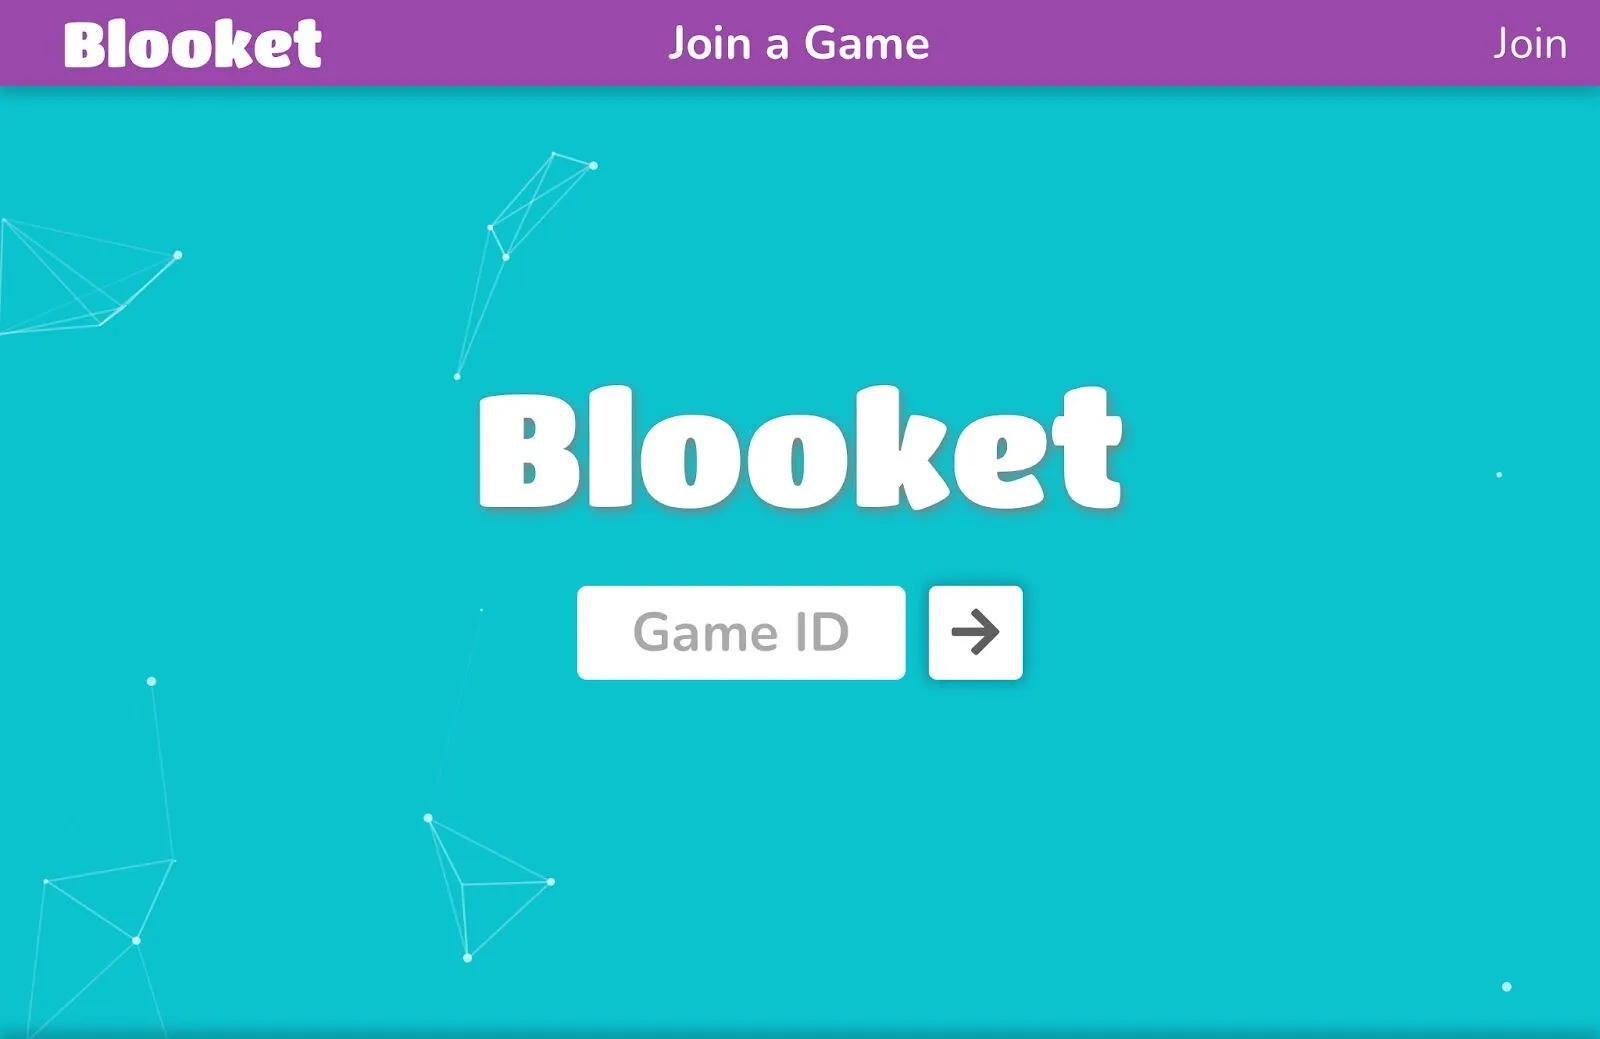 Become a Pro Gamer with Blooket Join Game!